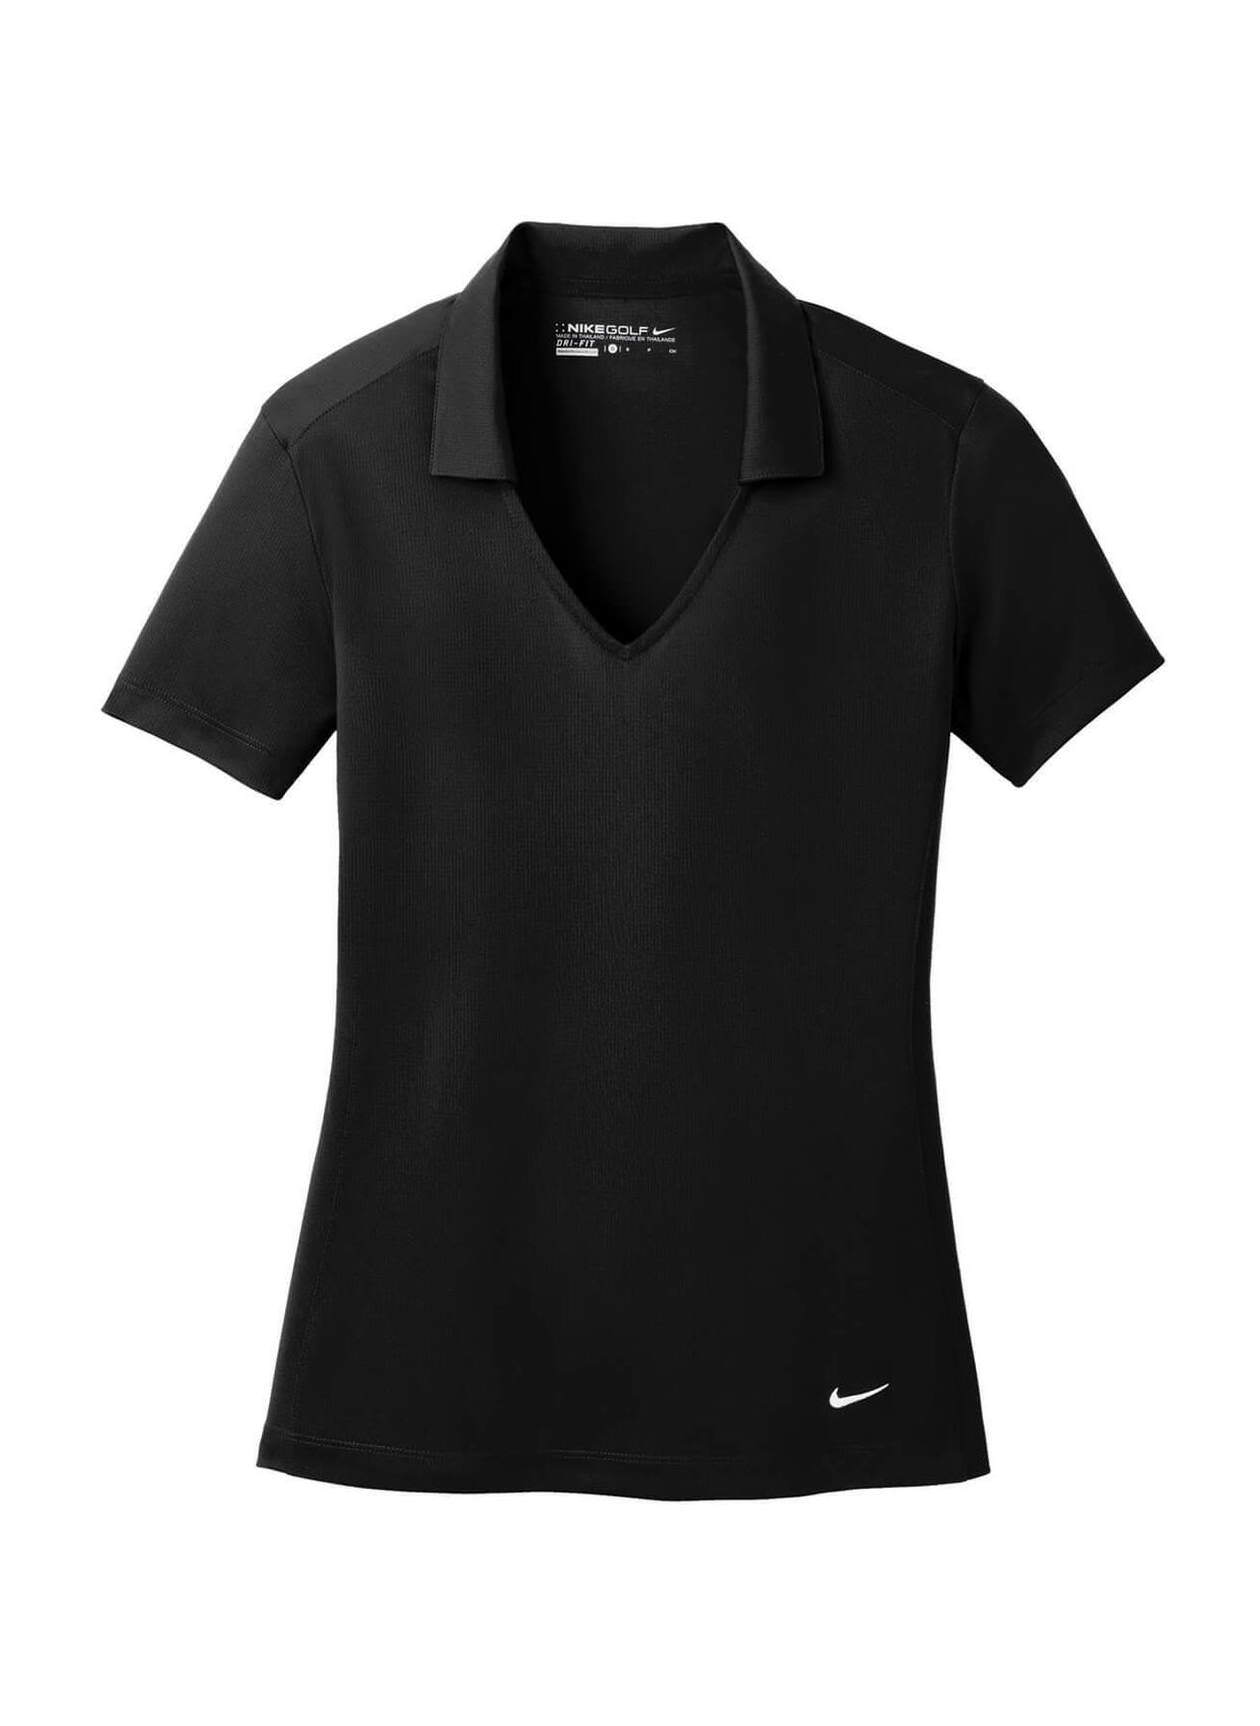 Embroidered Nike Dri-FIT Vertical Mesh | Vest